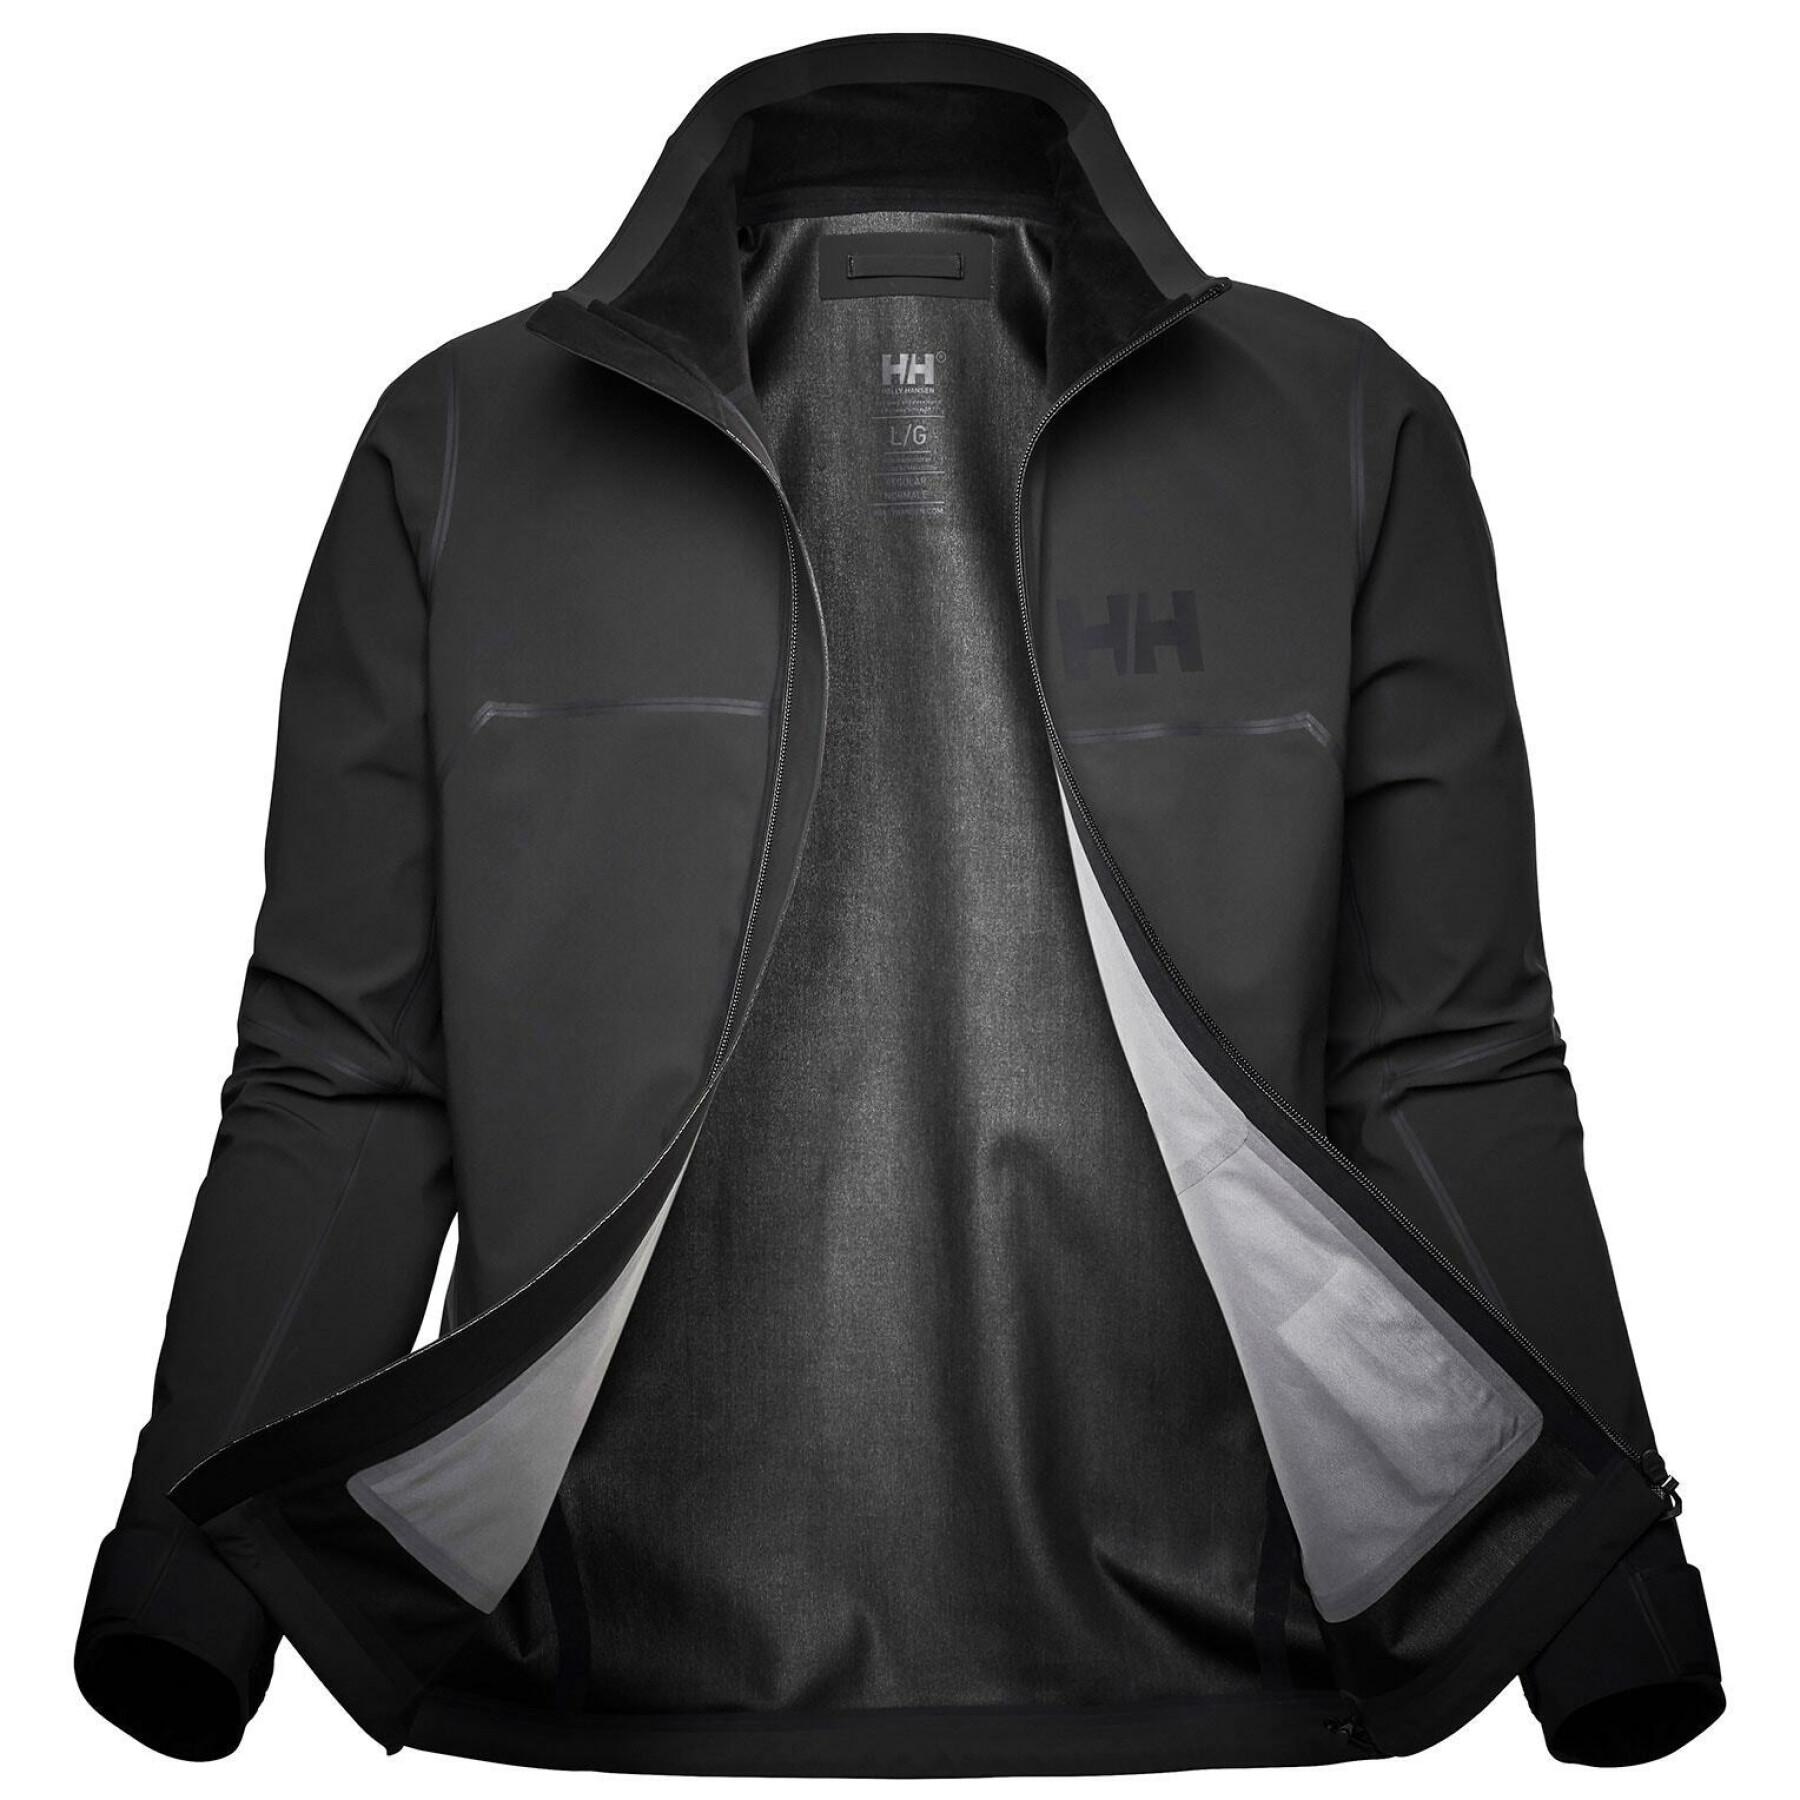 Giacca impermeabile in softshell Helly Hansen Foil Pro